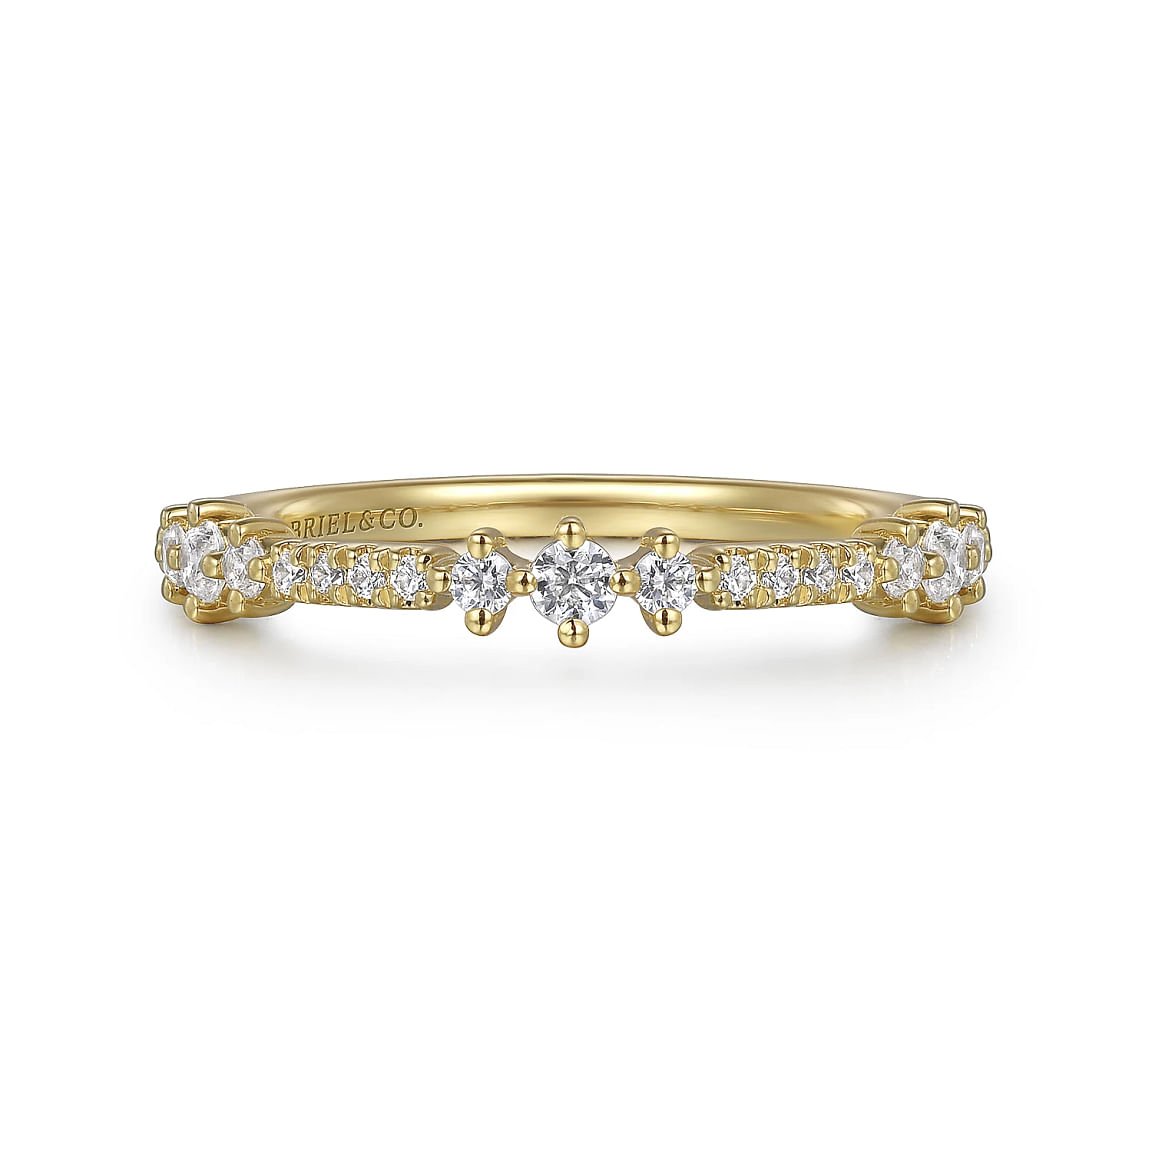 Ring alternating sizes of diamonds 14kt yellow gold - Gaines Jewelers